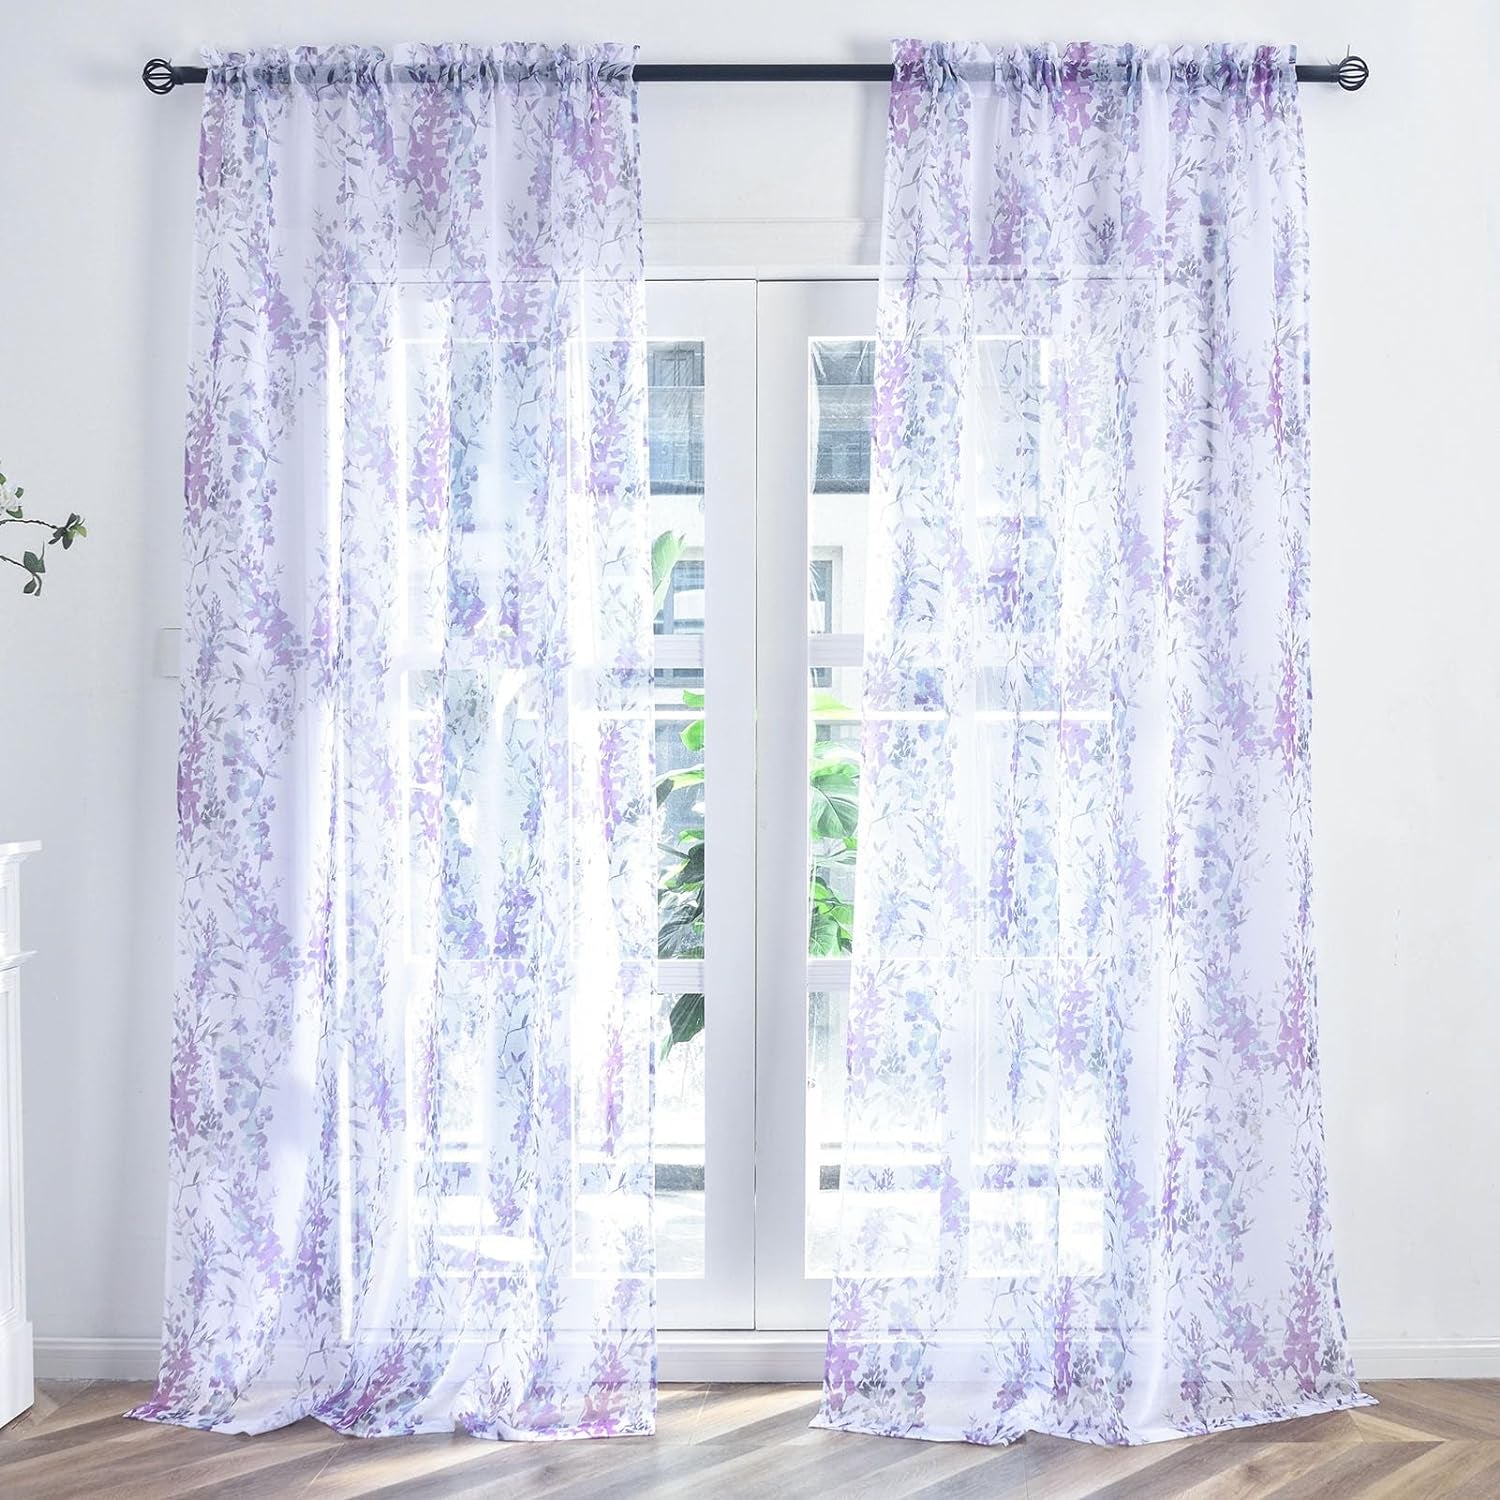 Kotile Purple White Sheer Curtains, Country Branch Leaf Print Sheer Curtains 63 Inch Length for Bedroom, Rod Pocket Privacy Floral Sheer Window Curtains, 50 X 63 Inch, 2 Panels, Purple  Kotile Textile   